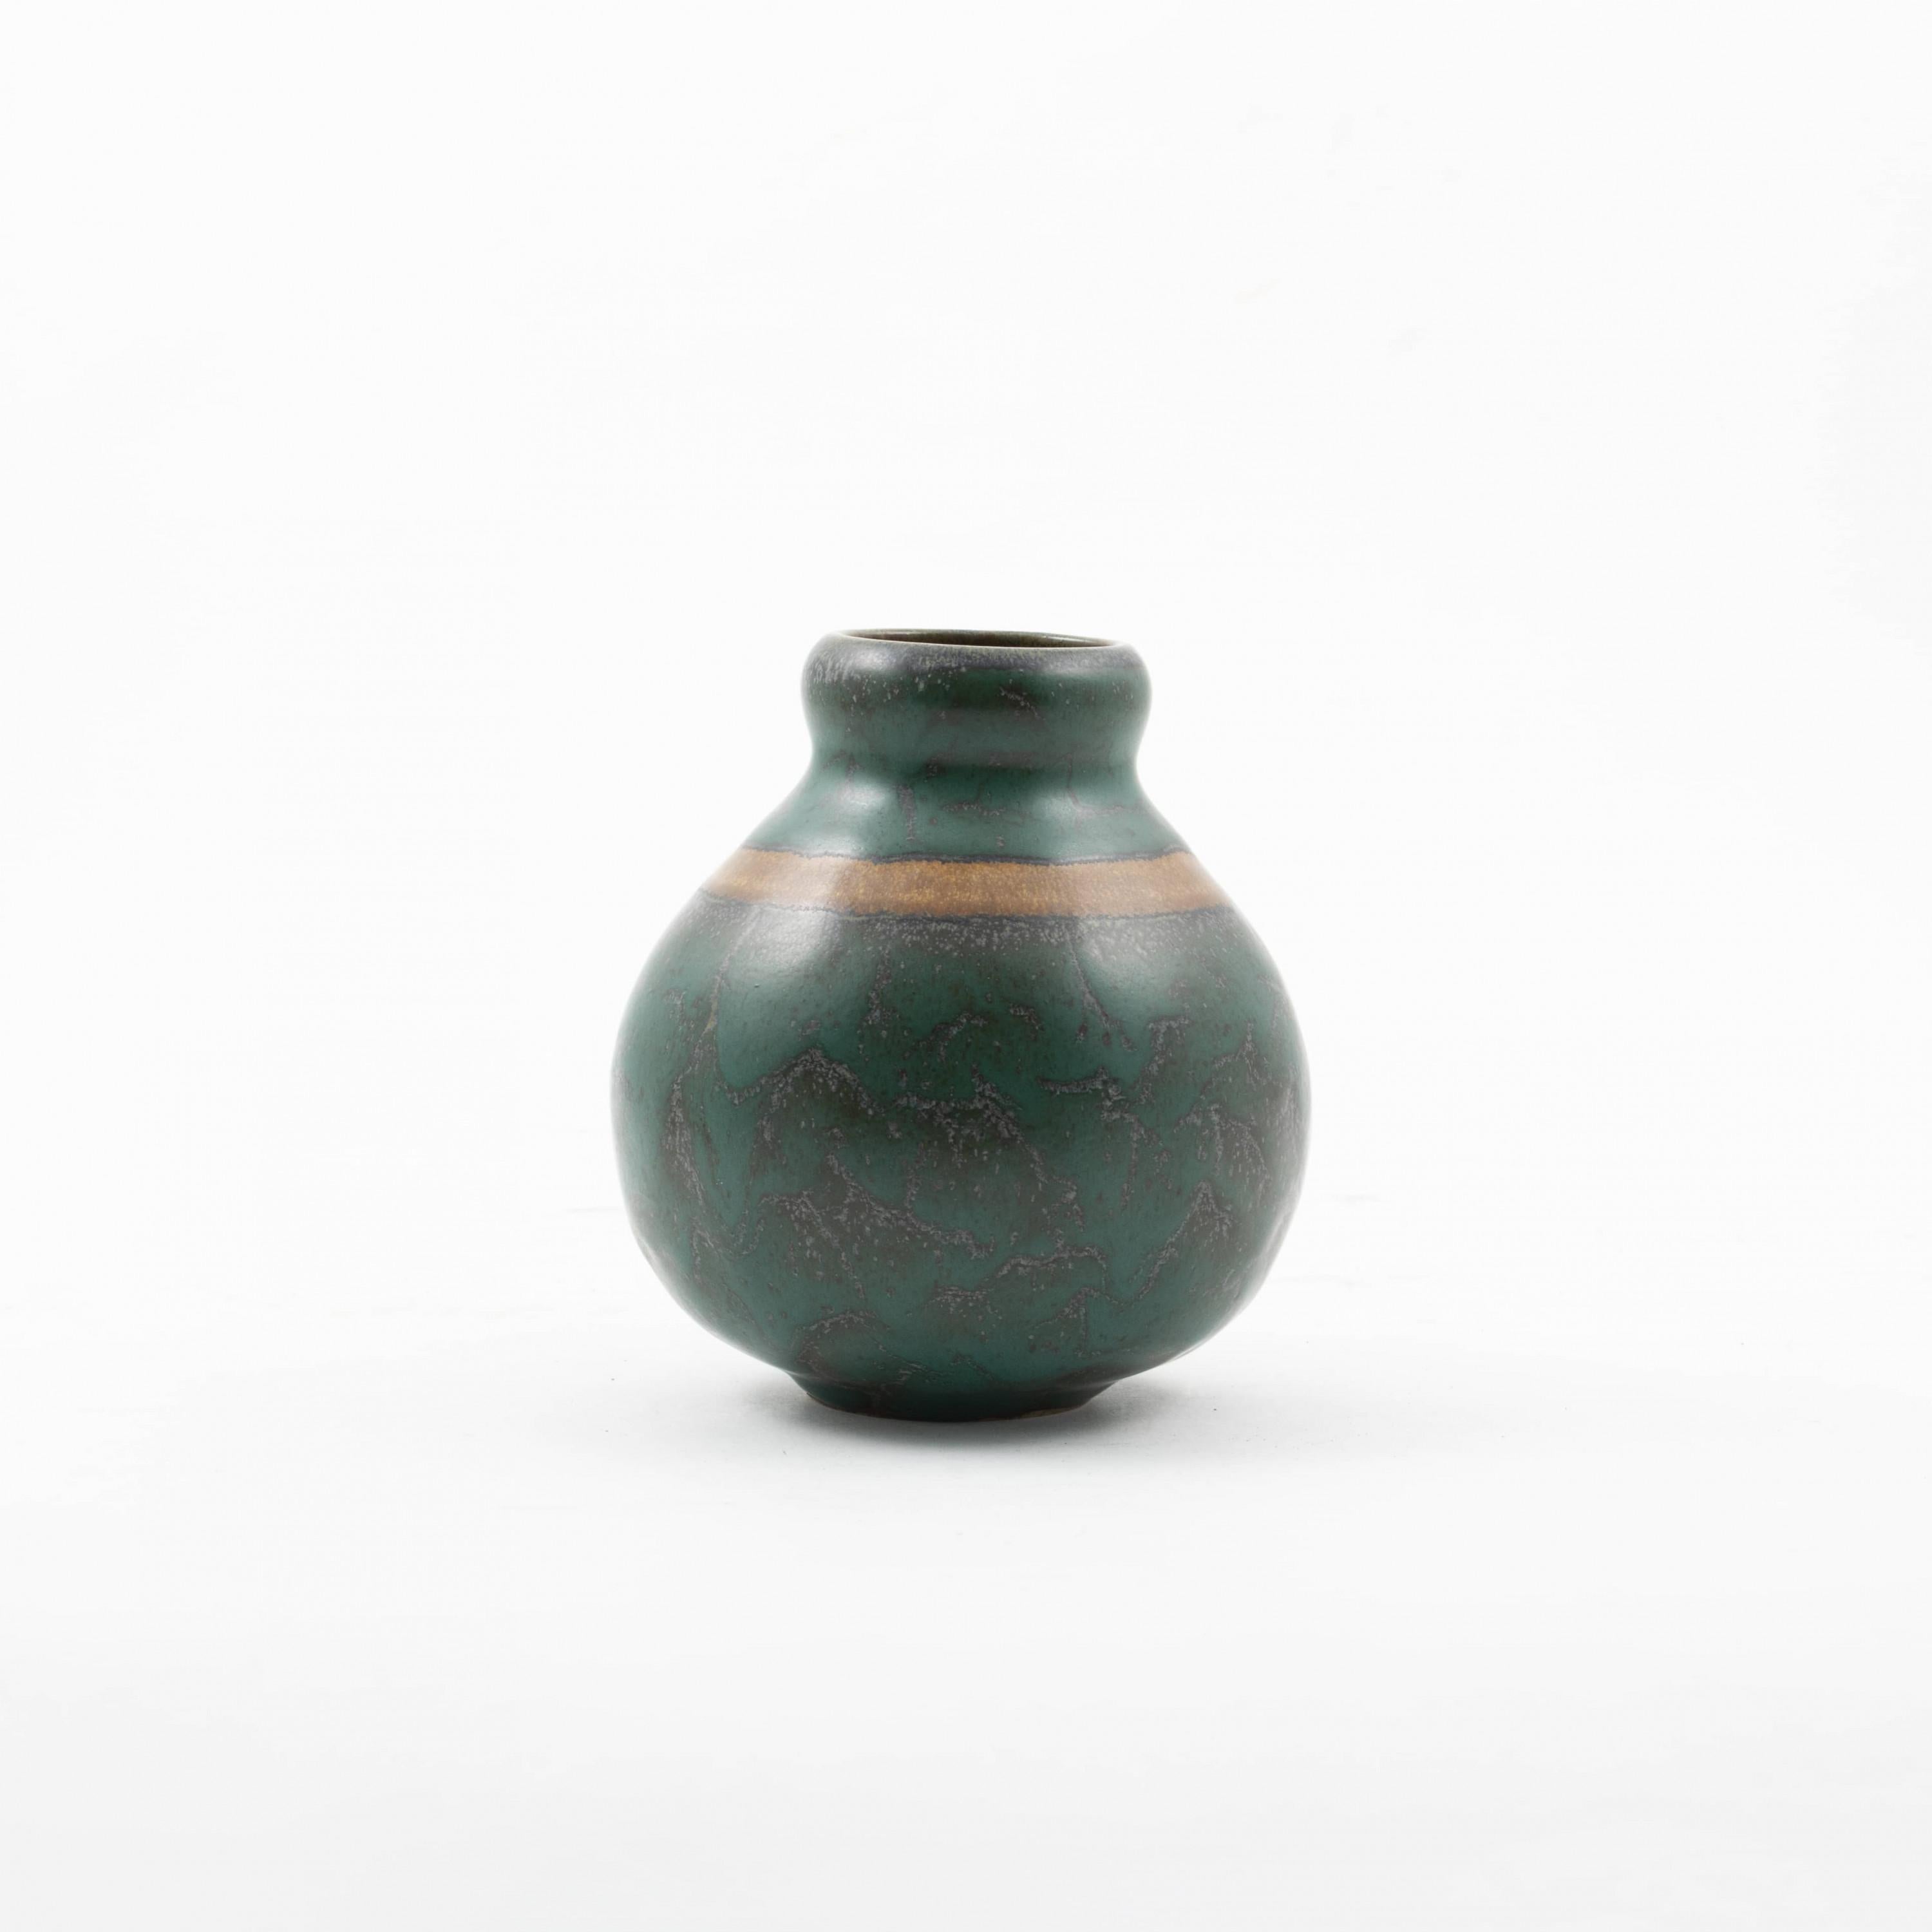 Louis Lourioux 1874-1930.
Beautiful and decorative stoneware vase decorated in turquoise-green glaze with a caramel-colored band.

Signature with the wolf stamp.
France approx. 1920.